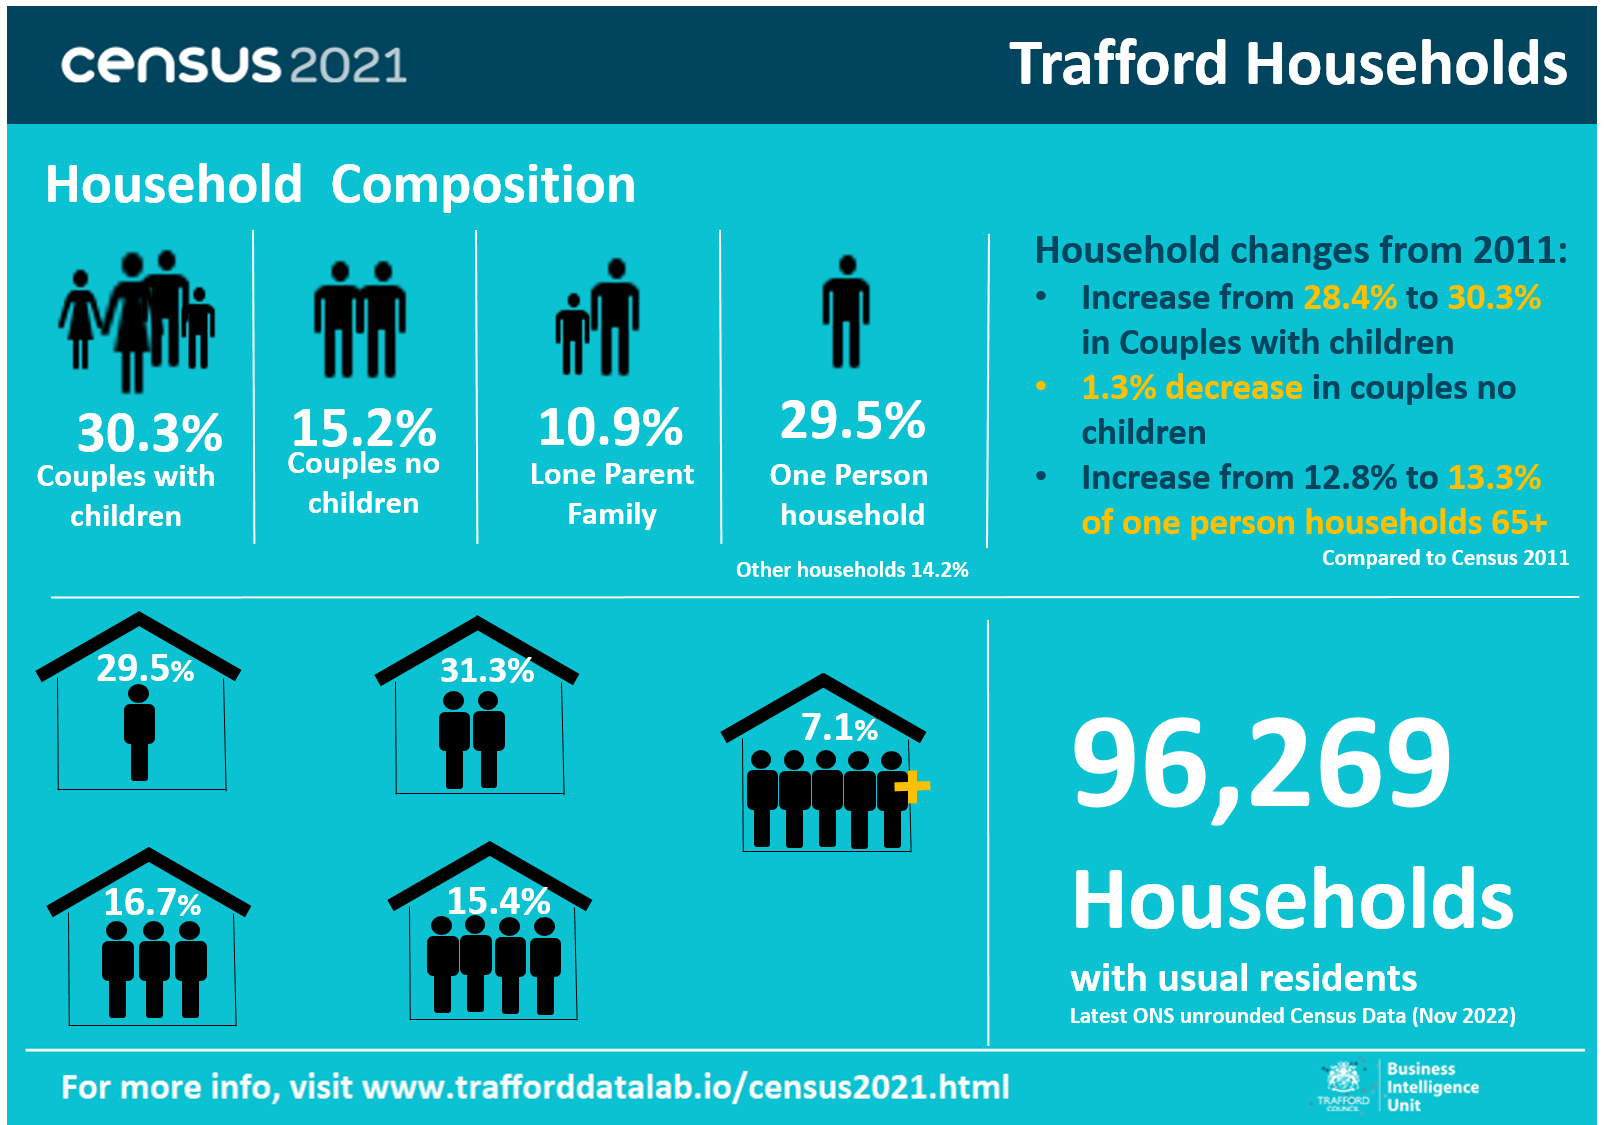 . Infographic containing unrounded household statistics from the census 2021 data.